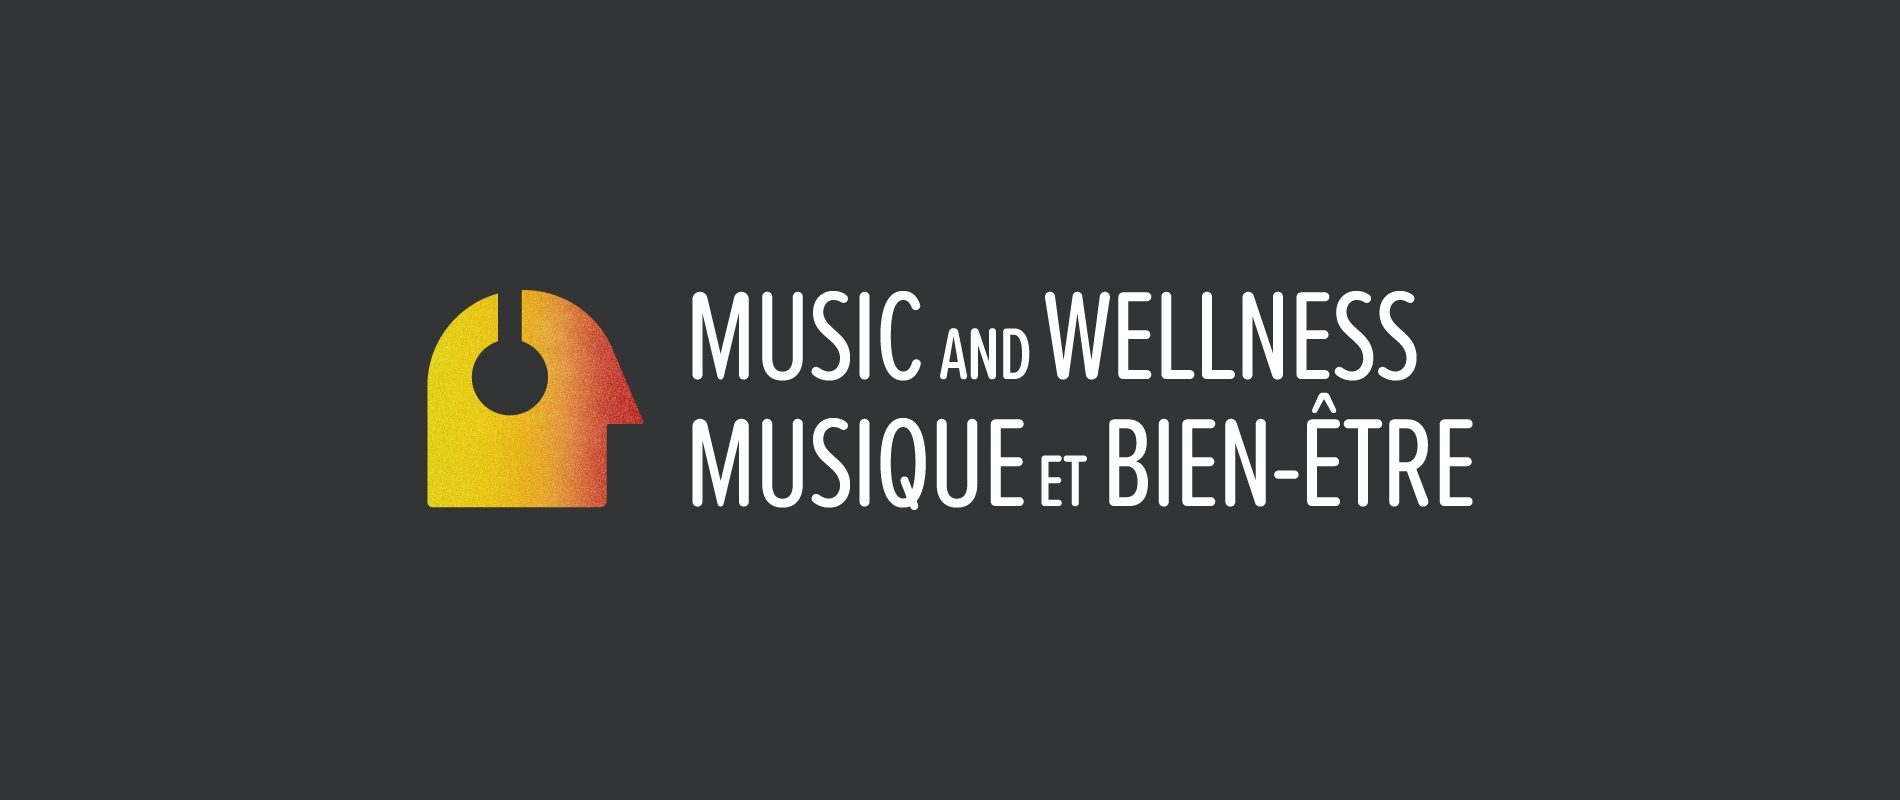 National Music Centre Launches Music & Wellness Exhibition on May 27